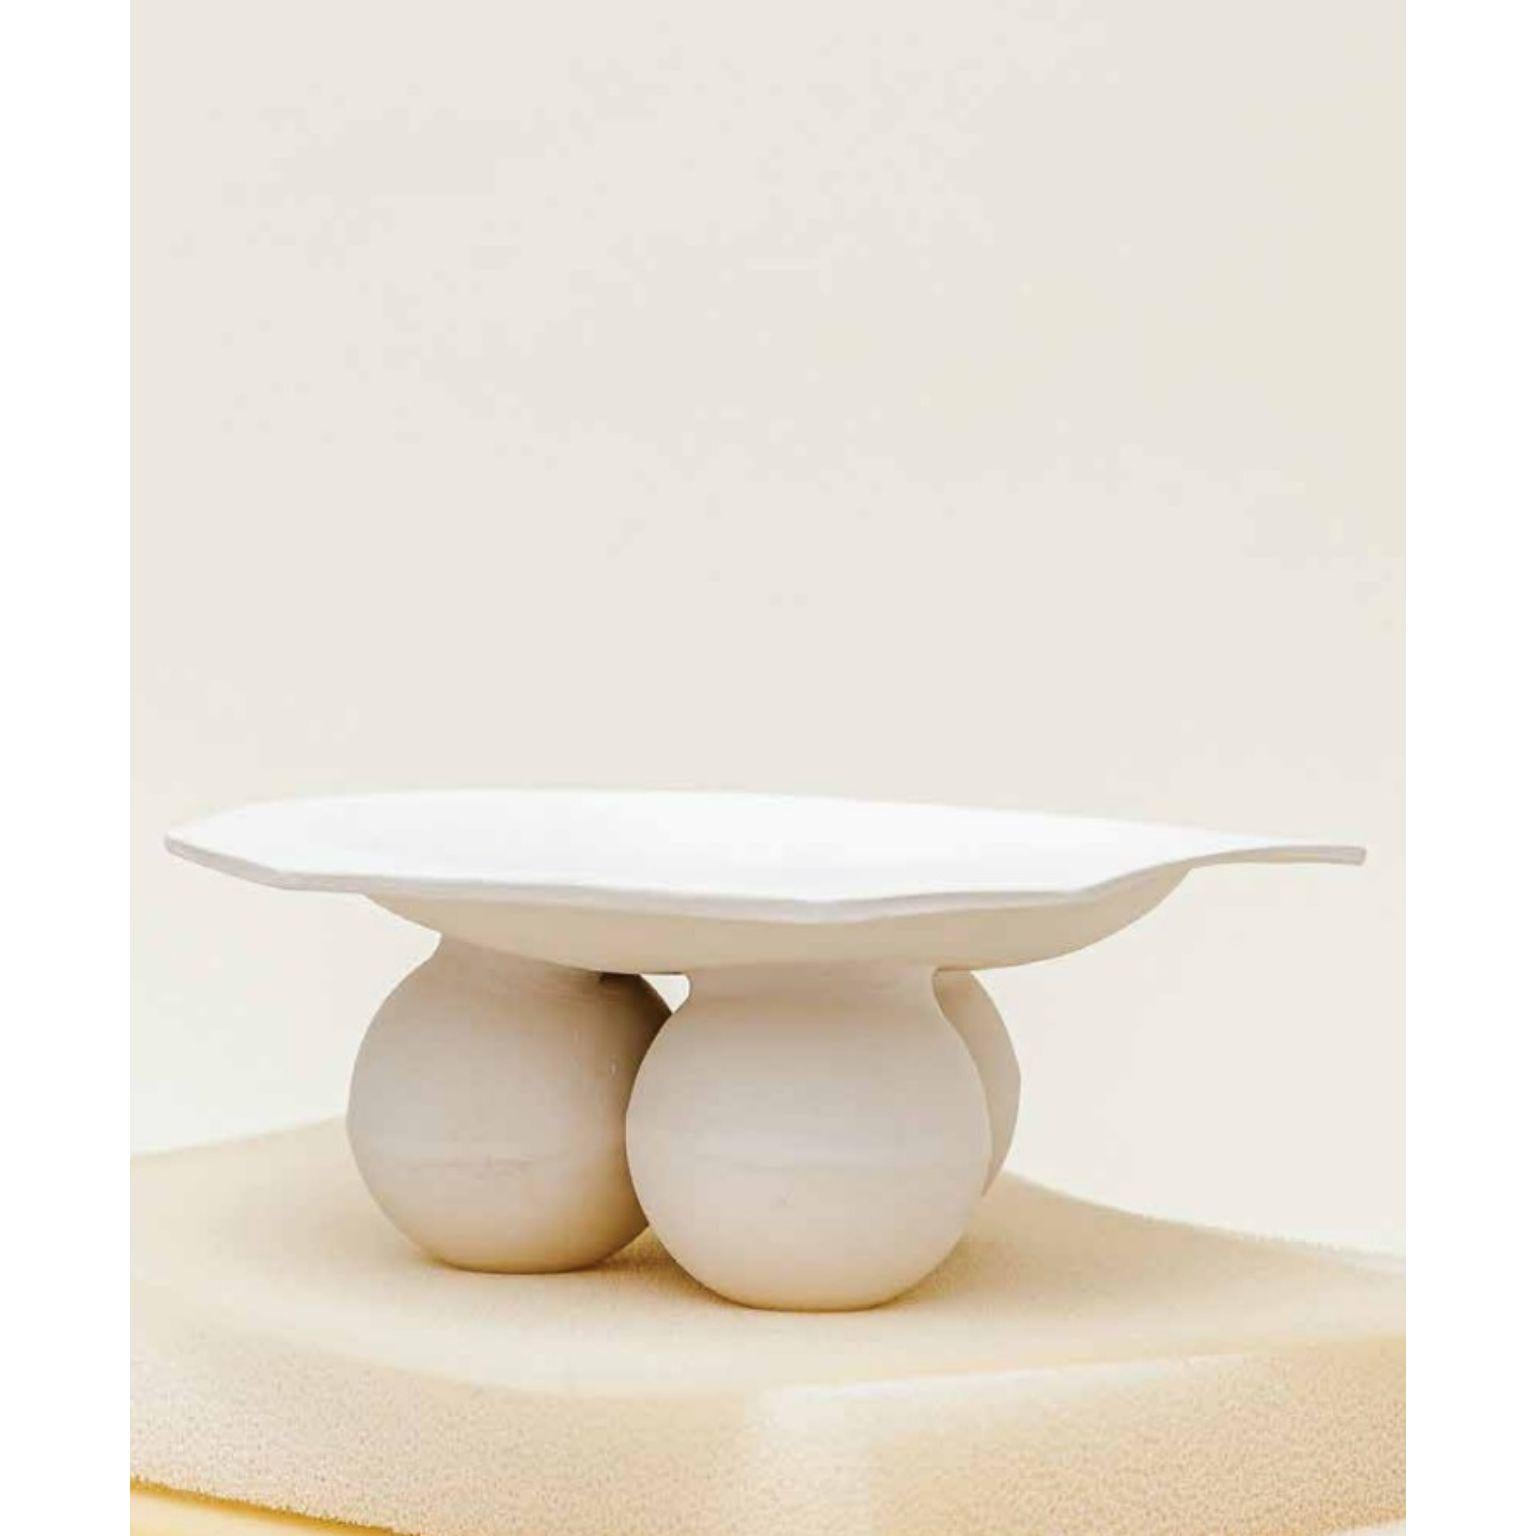 Samaia Fruit Bowl by Ia Kutateladze
One Of  A Kind.
Dimensions: D 29 x W 27 x H 12 cm.
Materials: Raw white clay.

Hand-built one of a kind, bold sculptural tableware piece, which could be used as a fruit bowl or platter. The irregular shapes are